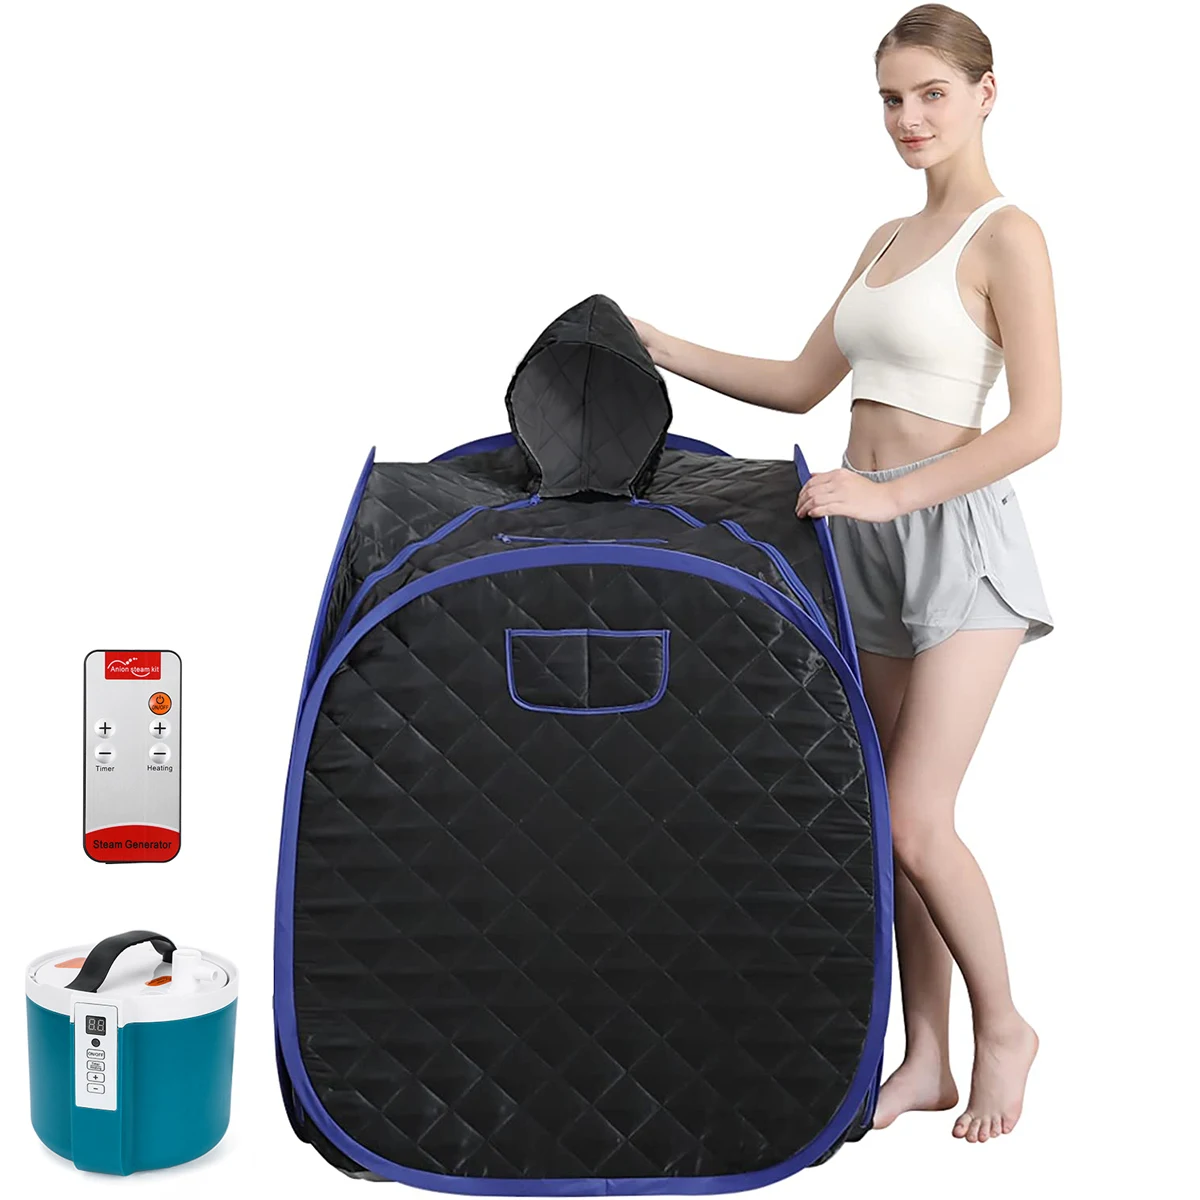 Foldable Light Steam Sauna Bucket Portable Bathtub Tent Home Spa Larger Bath Bucket For Weight Loss And Detox Treatment